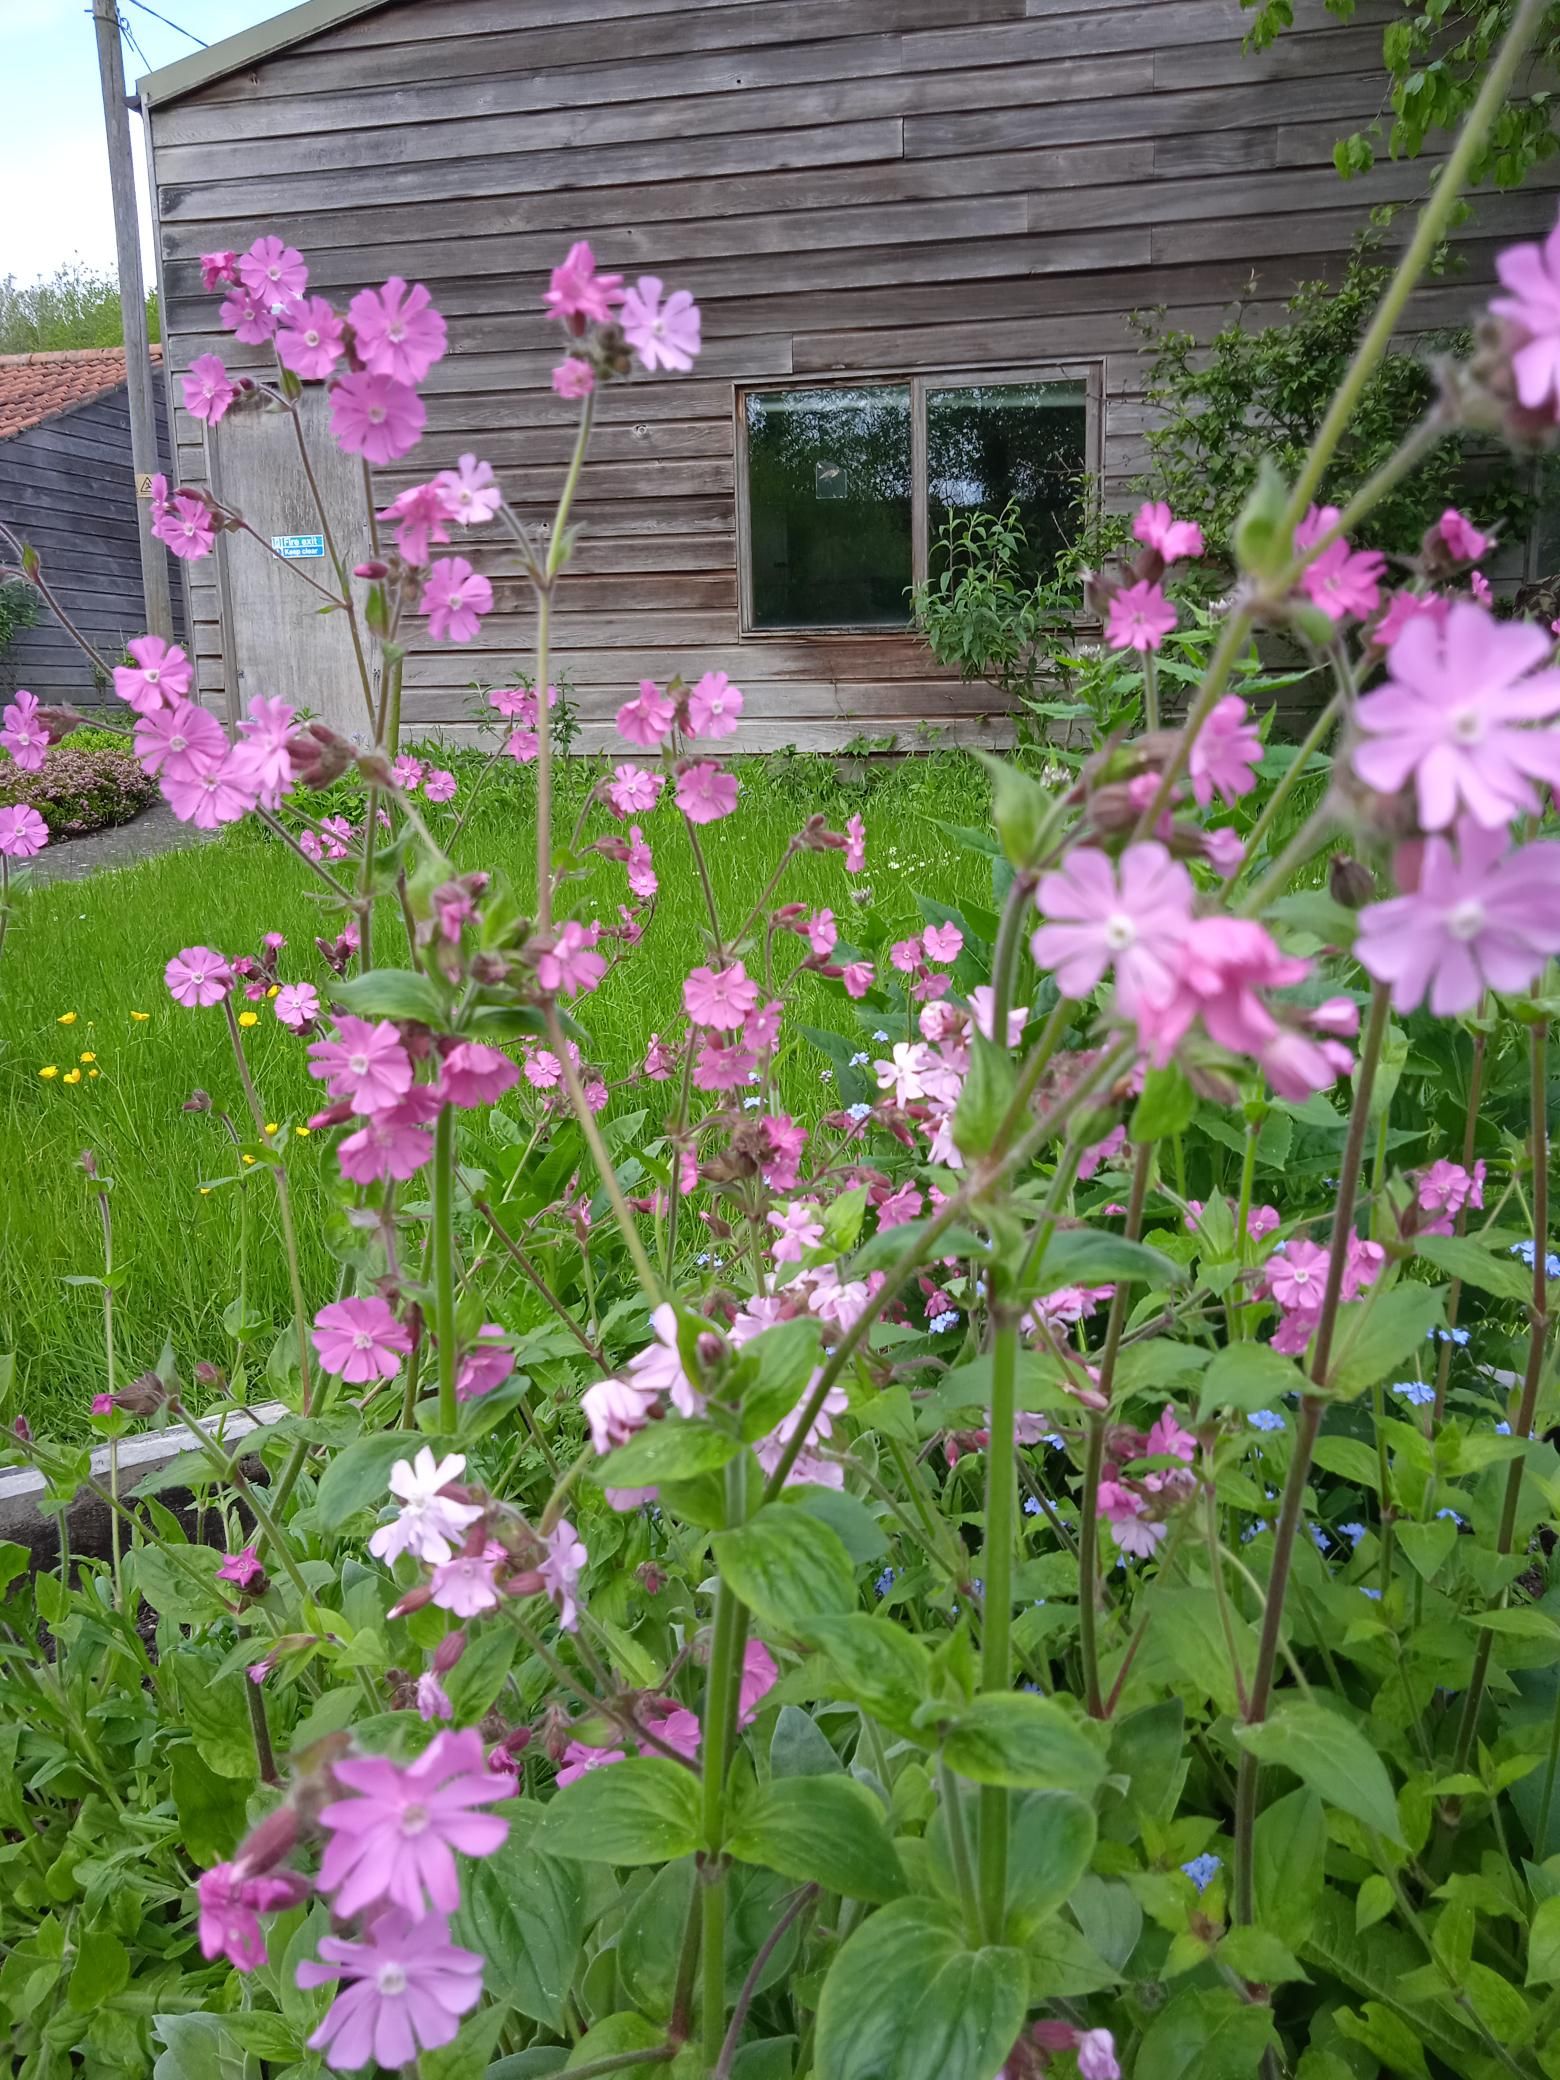 Red_campion (Silene dioica)